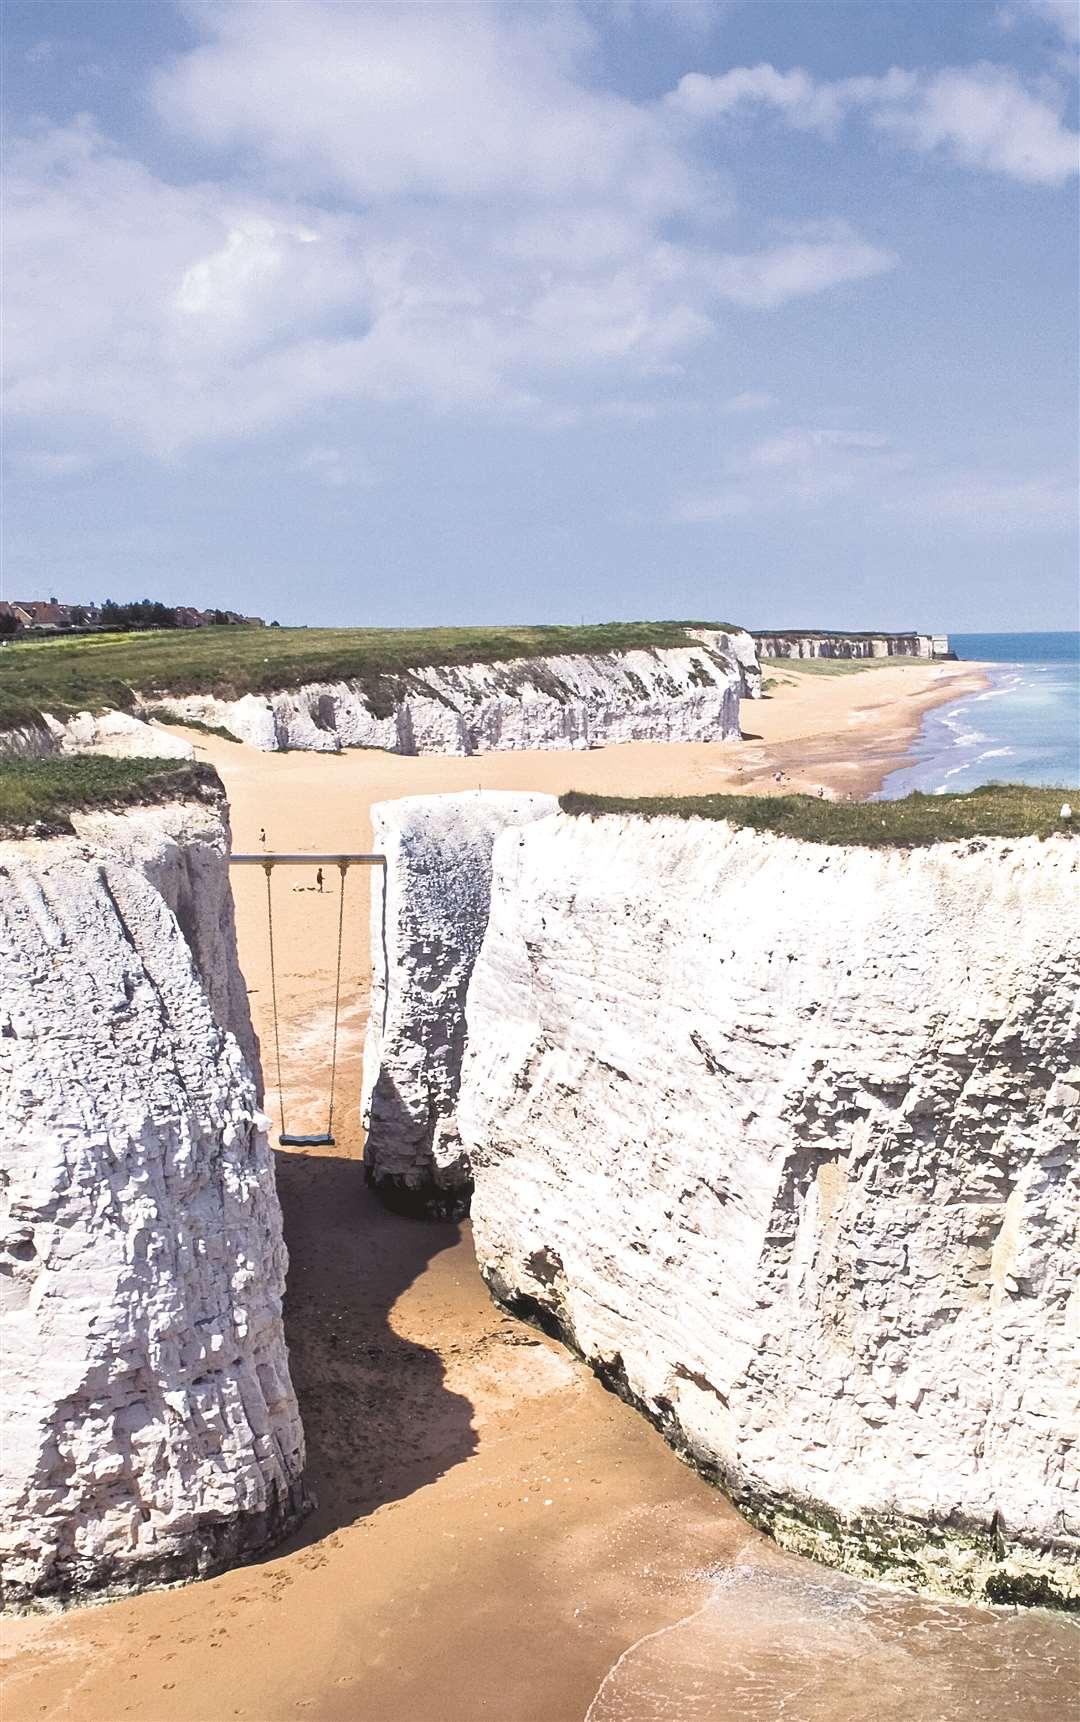 Apollo Shanti-Firis has unveiled plans to install a giant swing between the Botany Bay chalk stacks